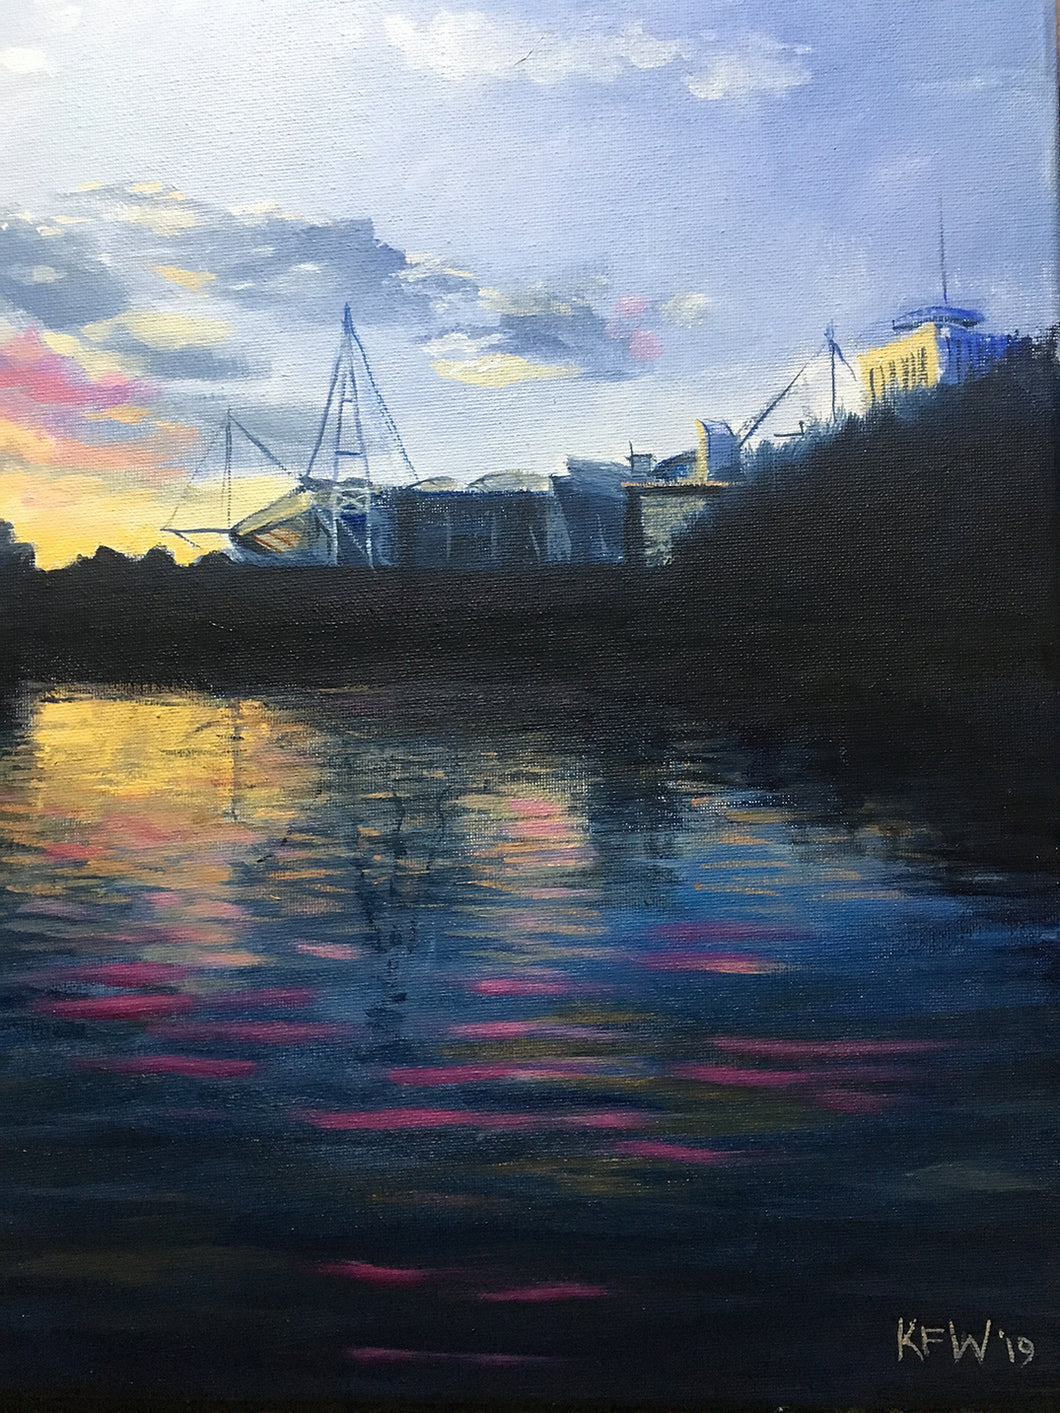 The Principality - Oil on canvas